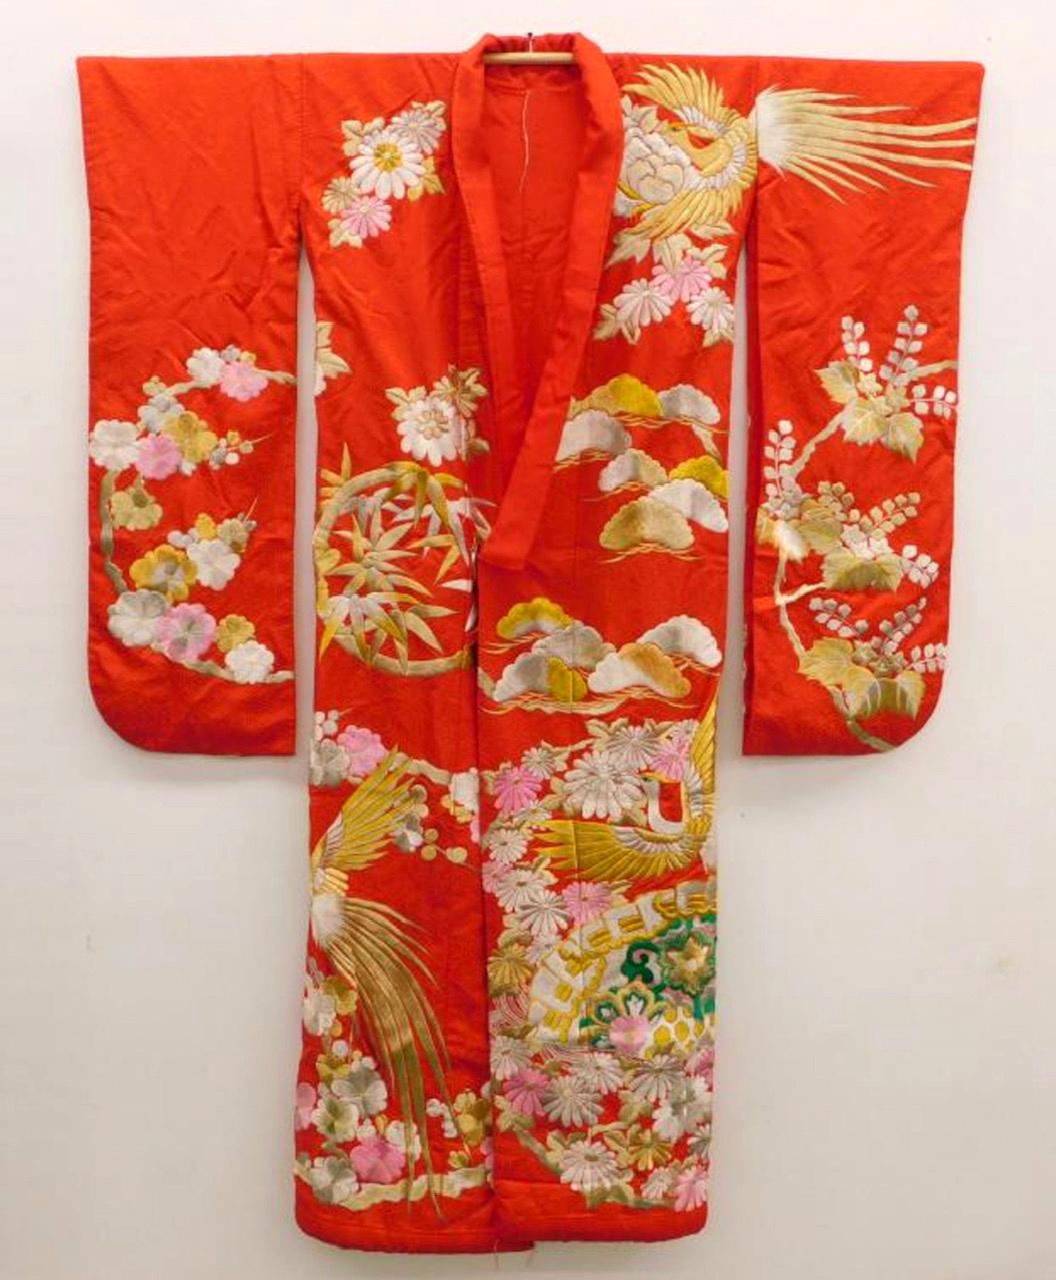 A visually striking antique Uchikake Wedding Kimono/Robe for ceremonial occasion, circa end of Meiji to Taisho period 1910s-1930s. This bridal outer garment is of a bright red color that features elaborate and intricate embroidery. Using brilliant